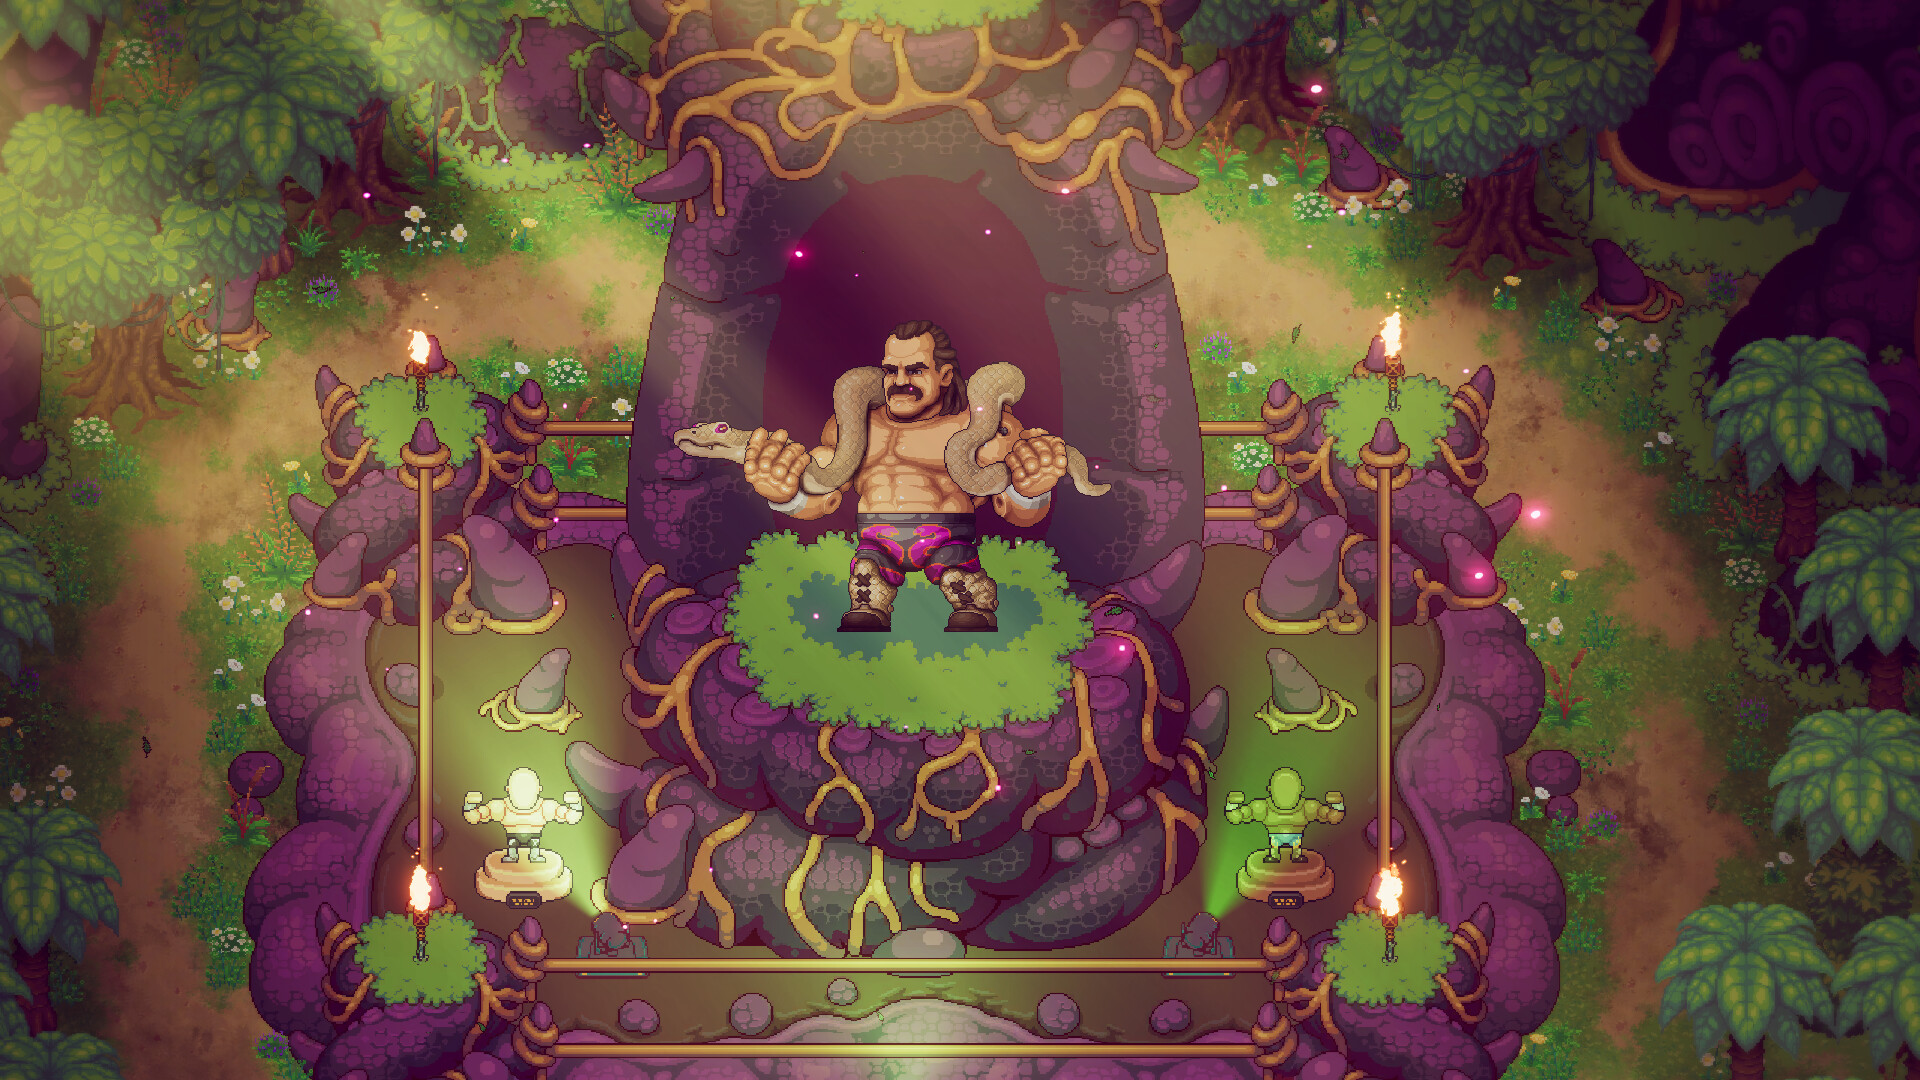 WrestleQuest Launches August 22 for PC, Console and Mobile